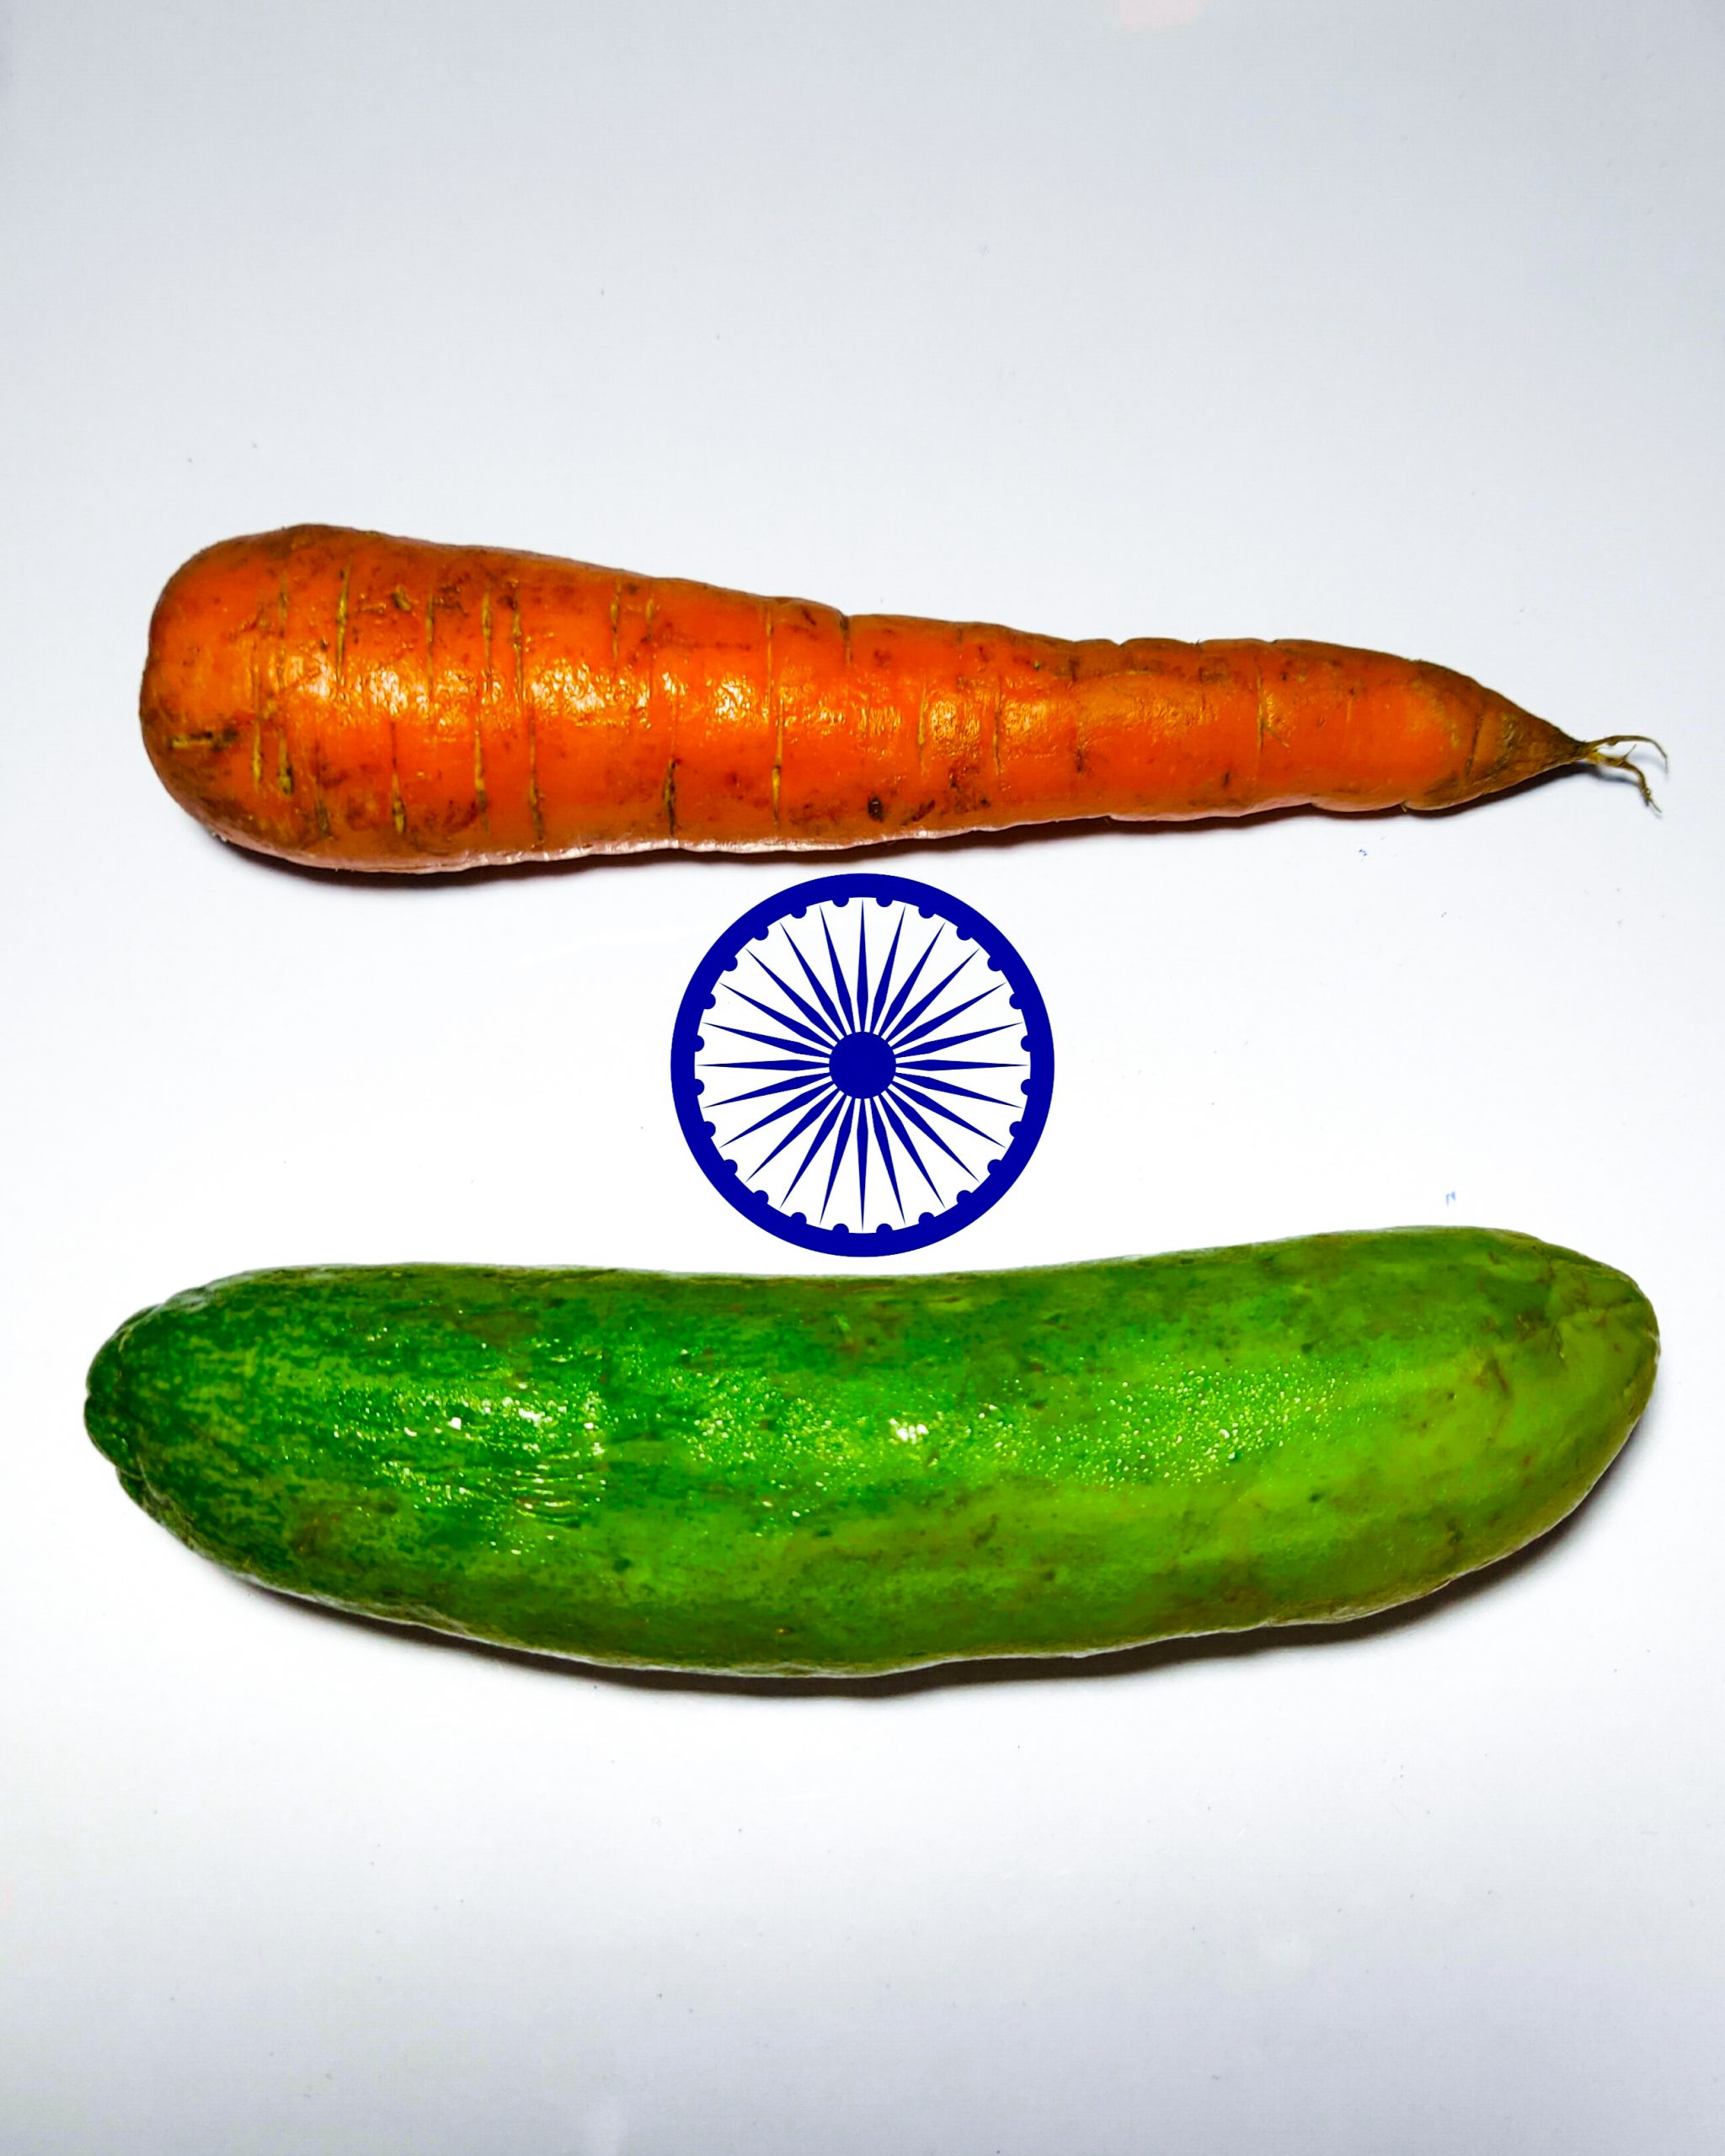 Vegetables representing the colors of the Flag of India